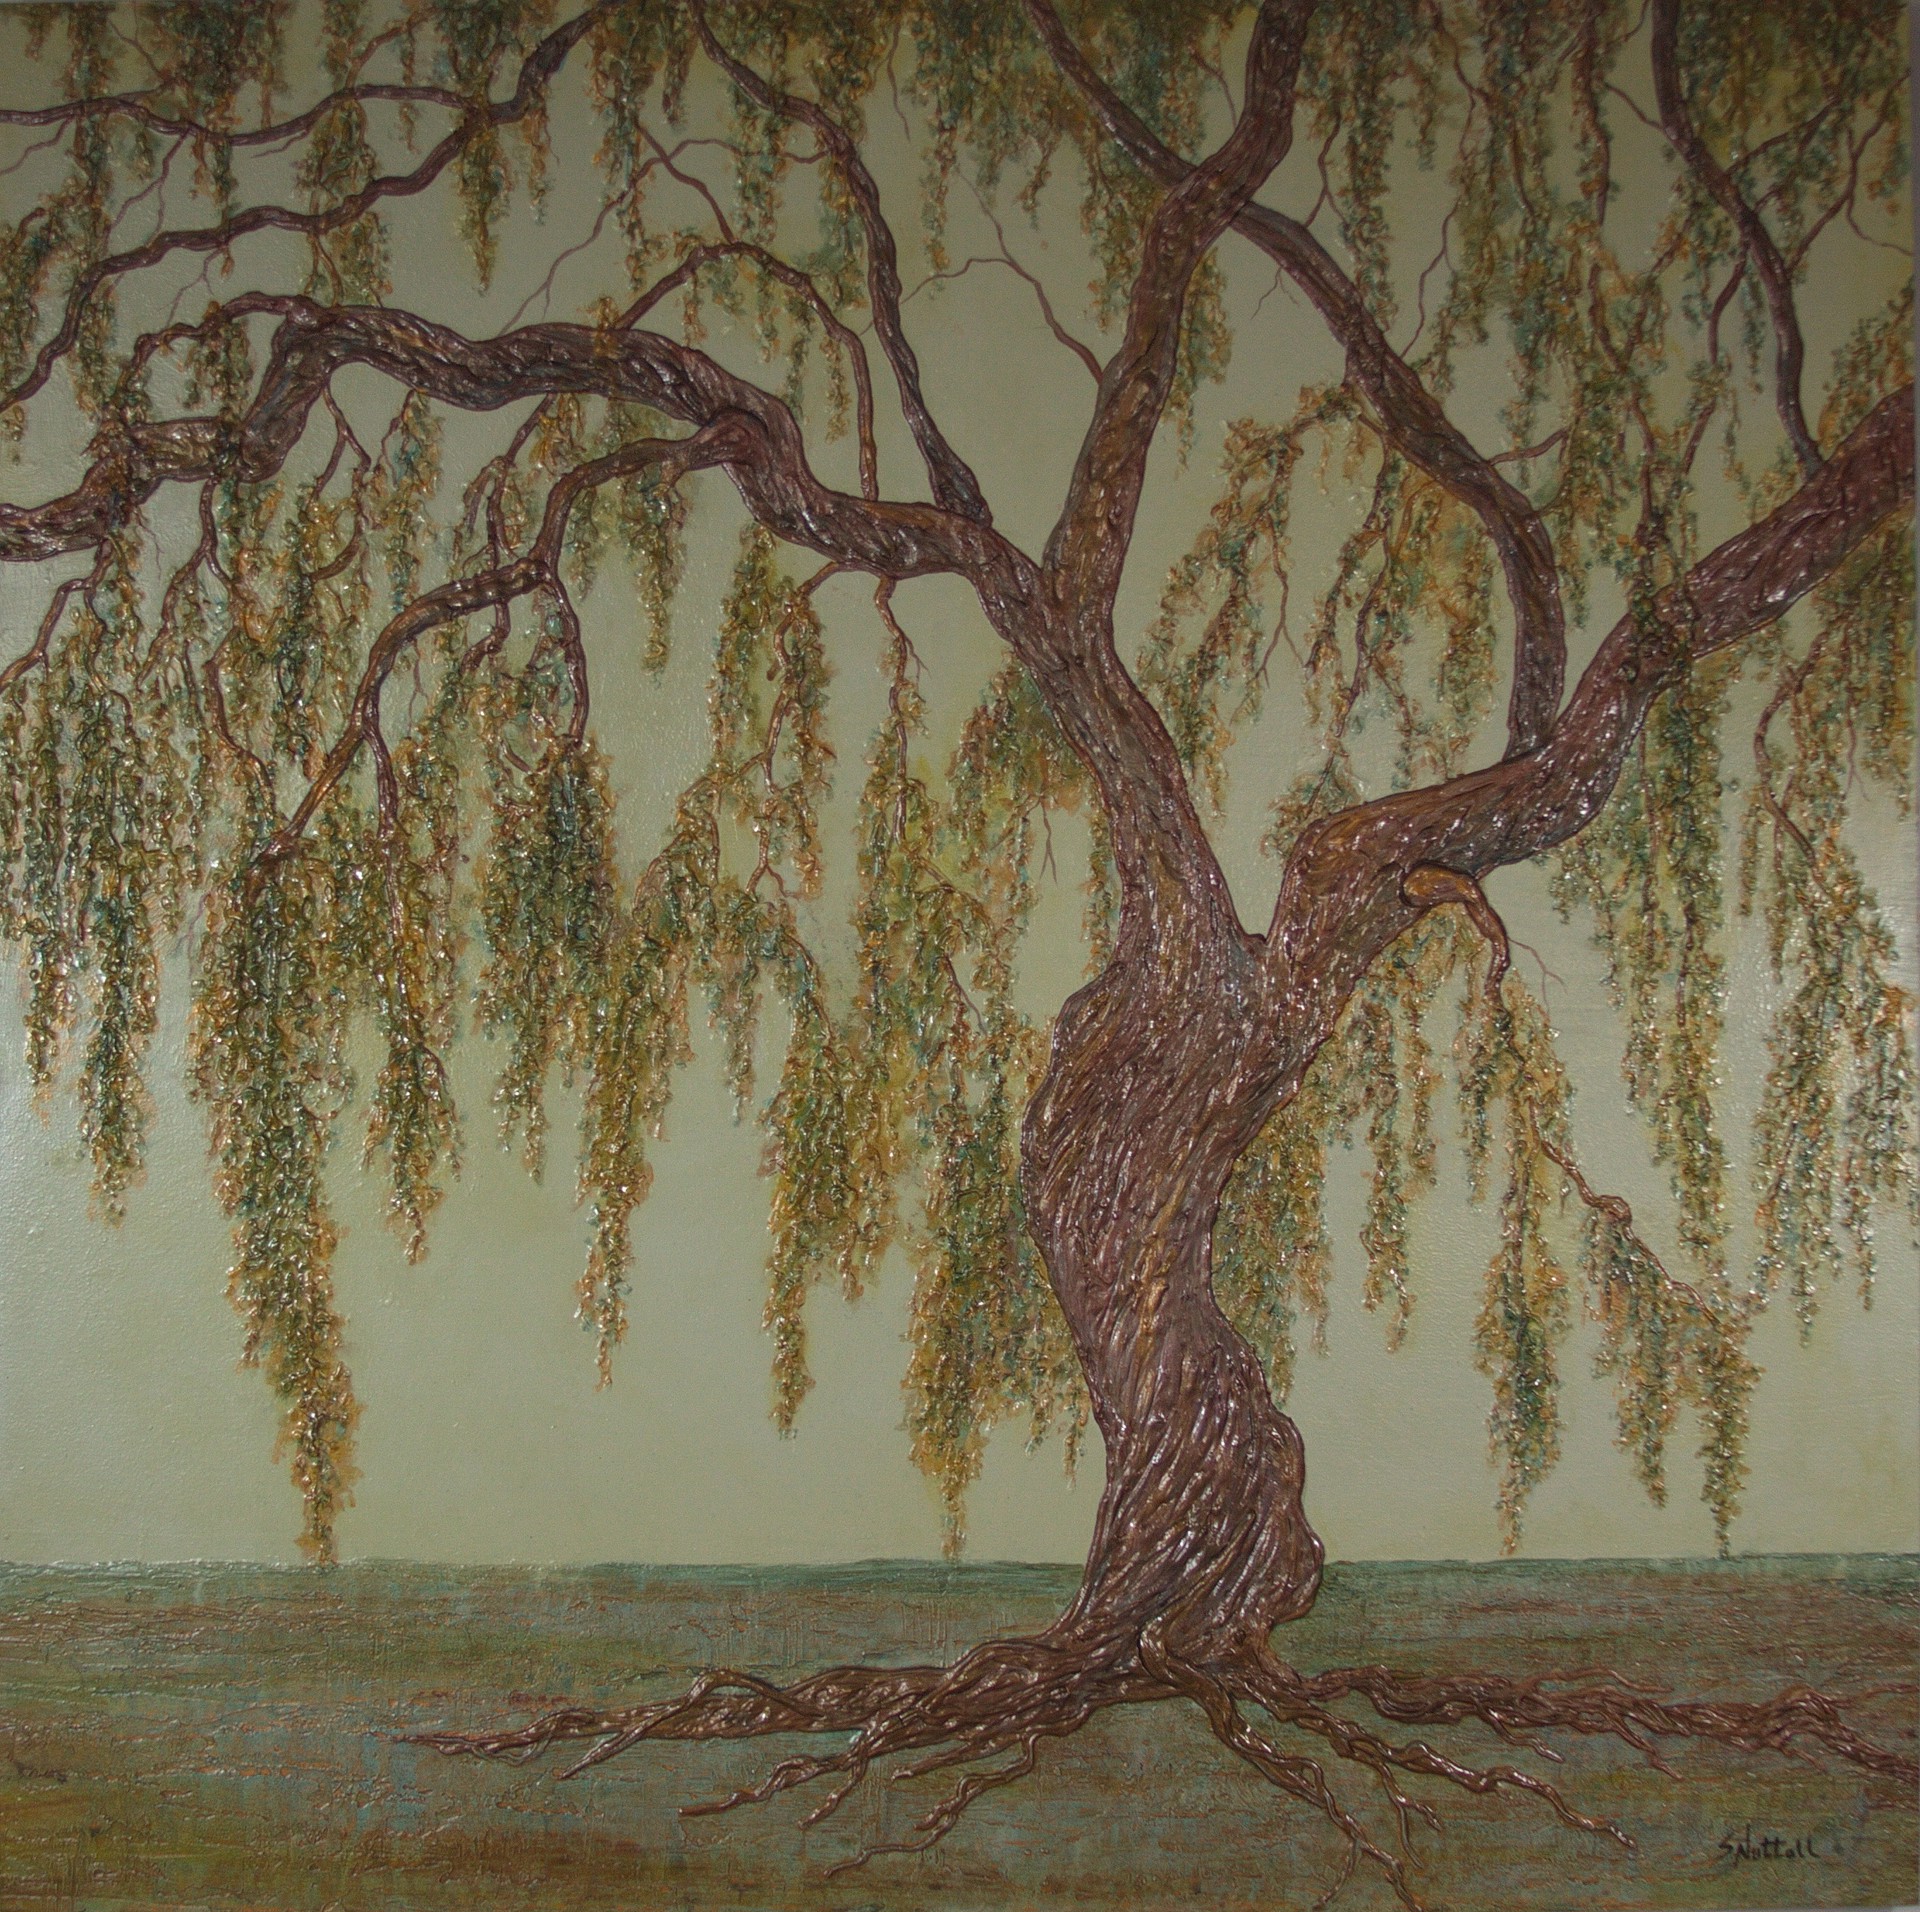 Old Willow Tree by Susan Nuttall